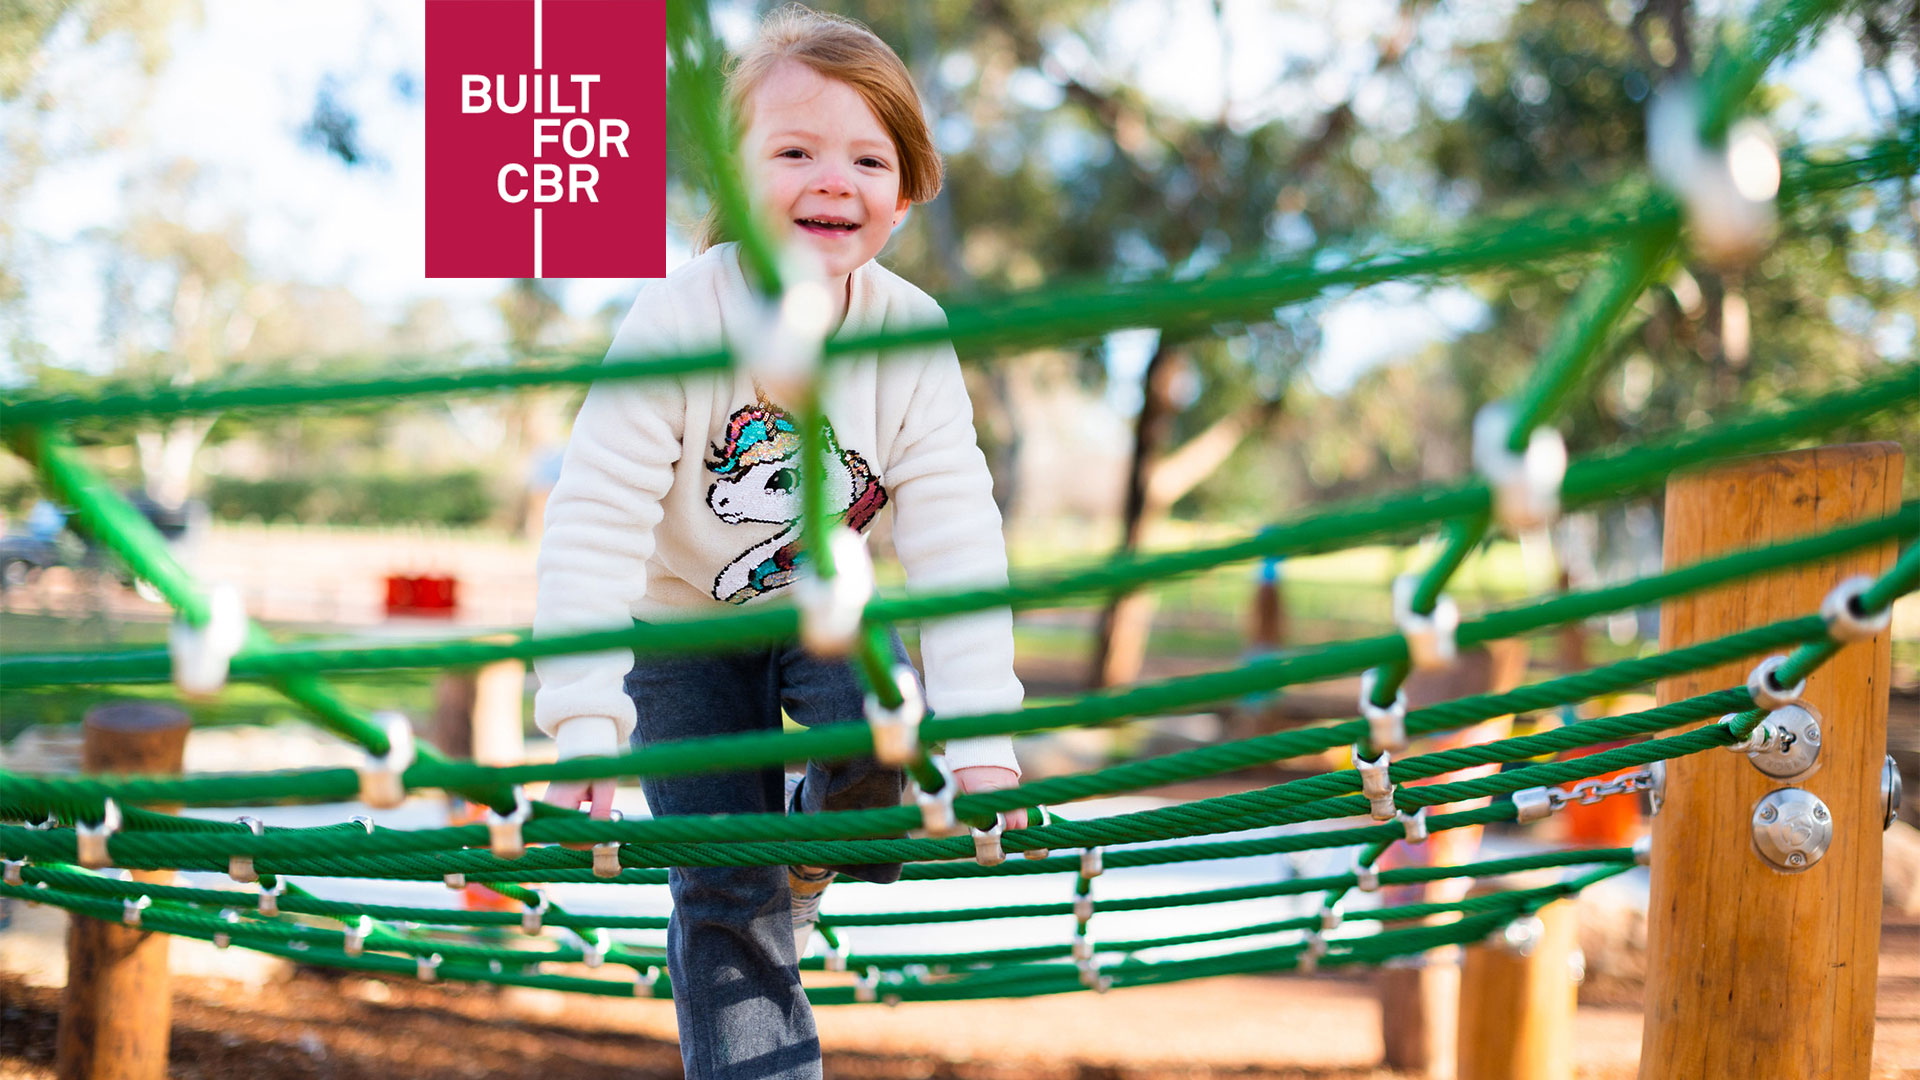 A smiling child climbs across netting at a playground